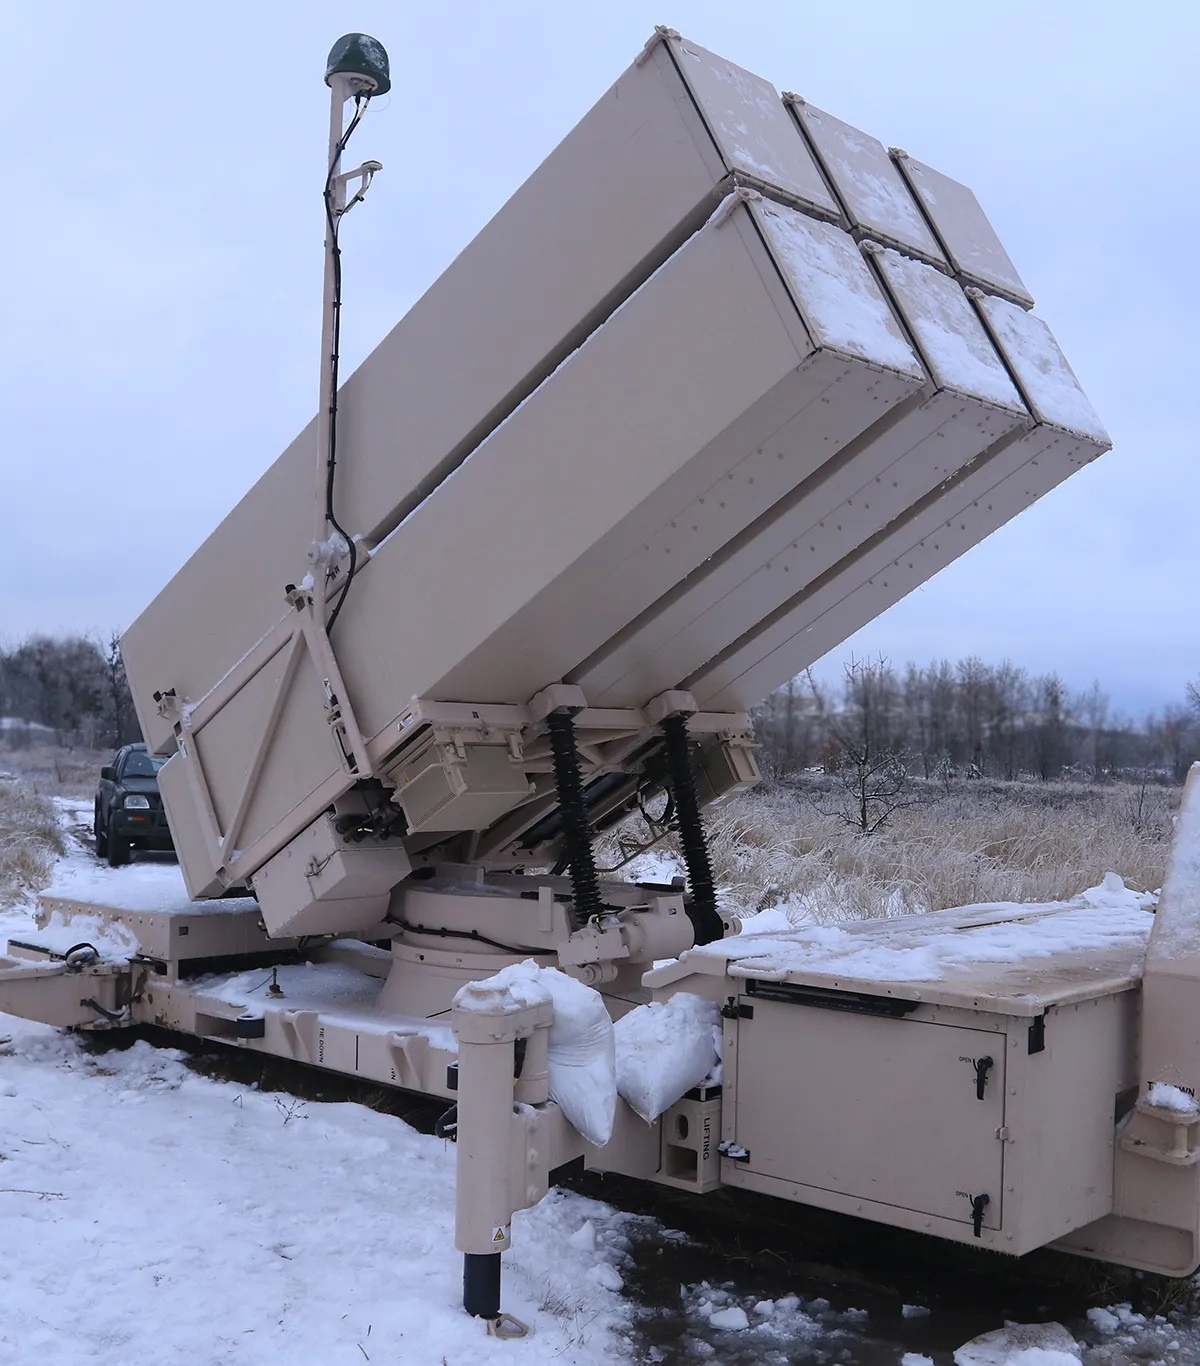 NASAMS launcher on duty in Ukraine / Defense Express / Norway will Rebuild its Air Defense Based on Ukraine's Experience